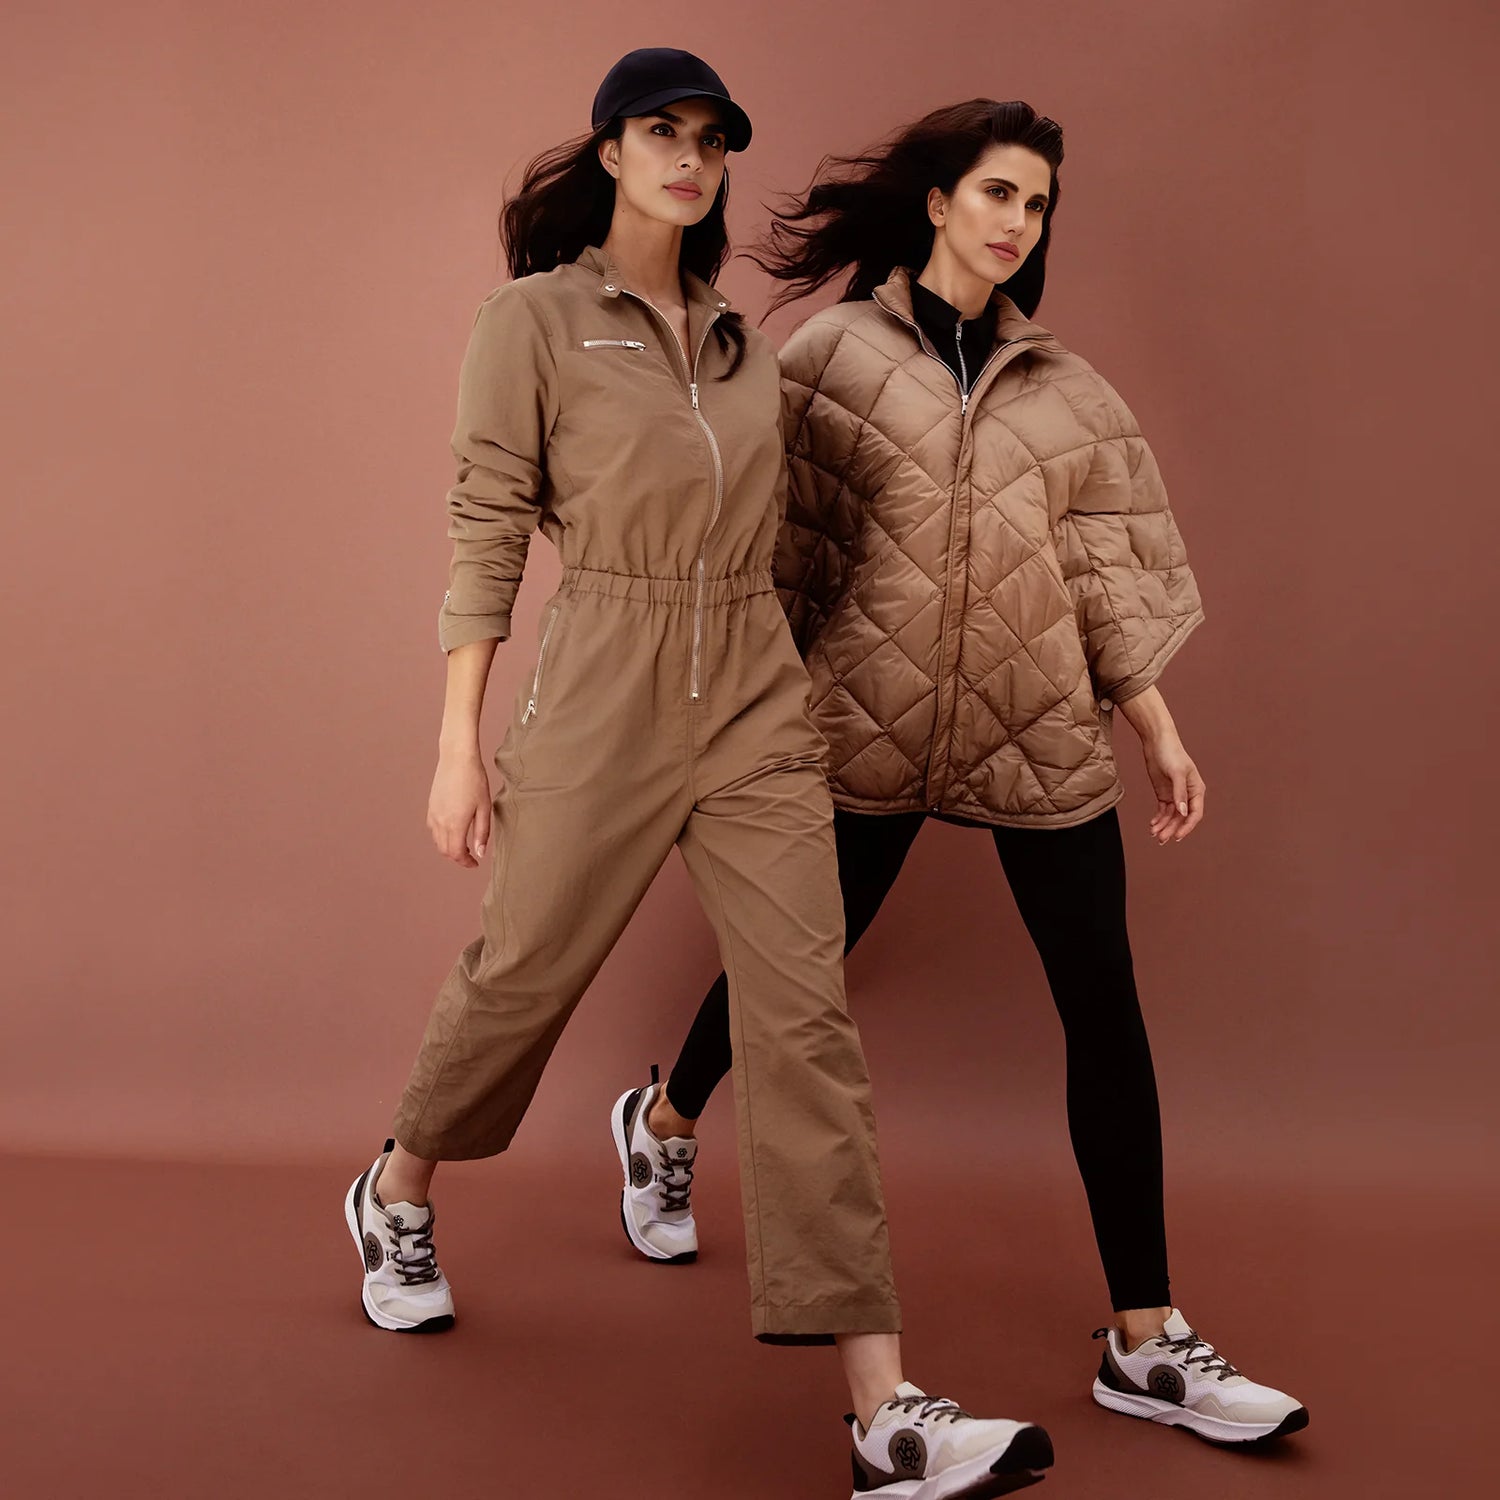 Two girls, one in a jumpsuit and the other in sport pants with a jacket, available at Kayanee KSA